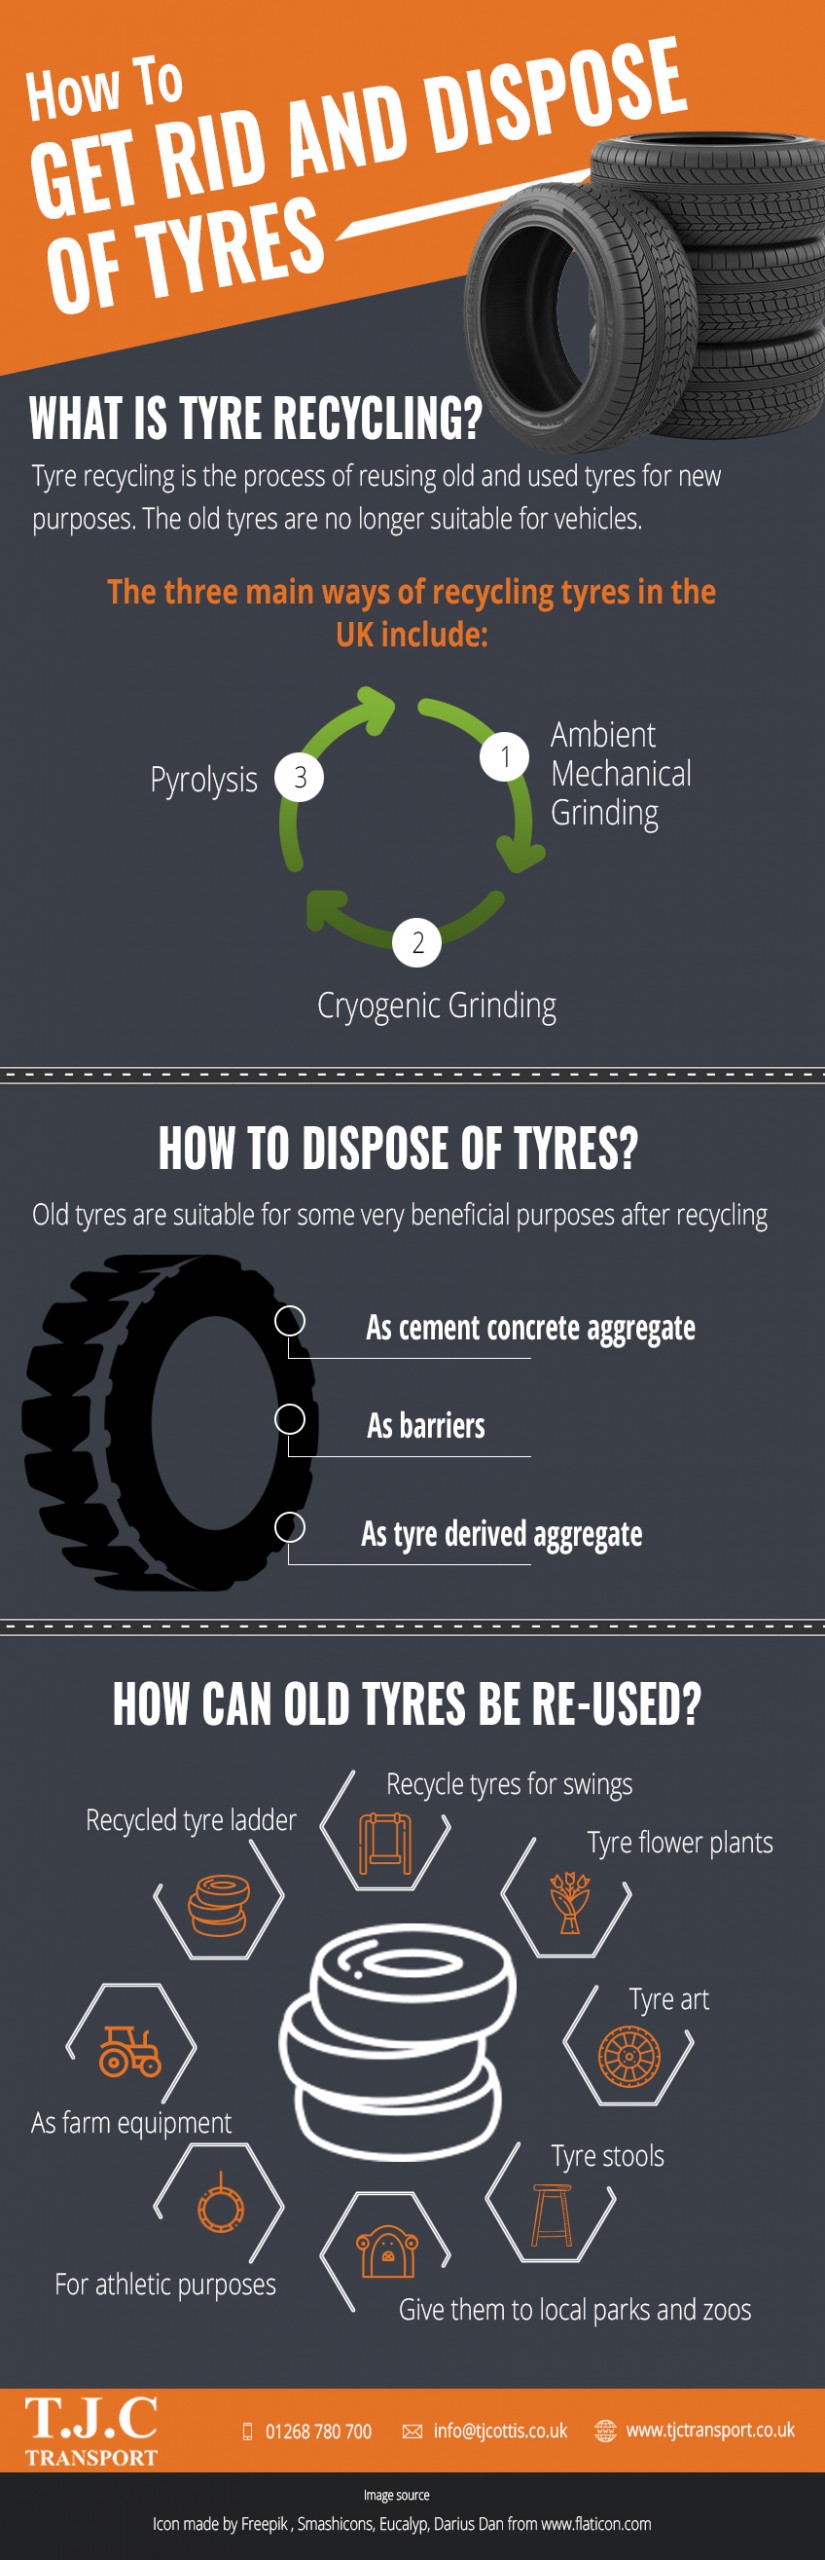 How To Get Rid And Dispose Of Tyres